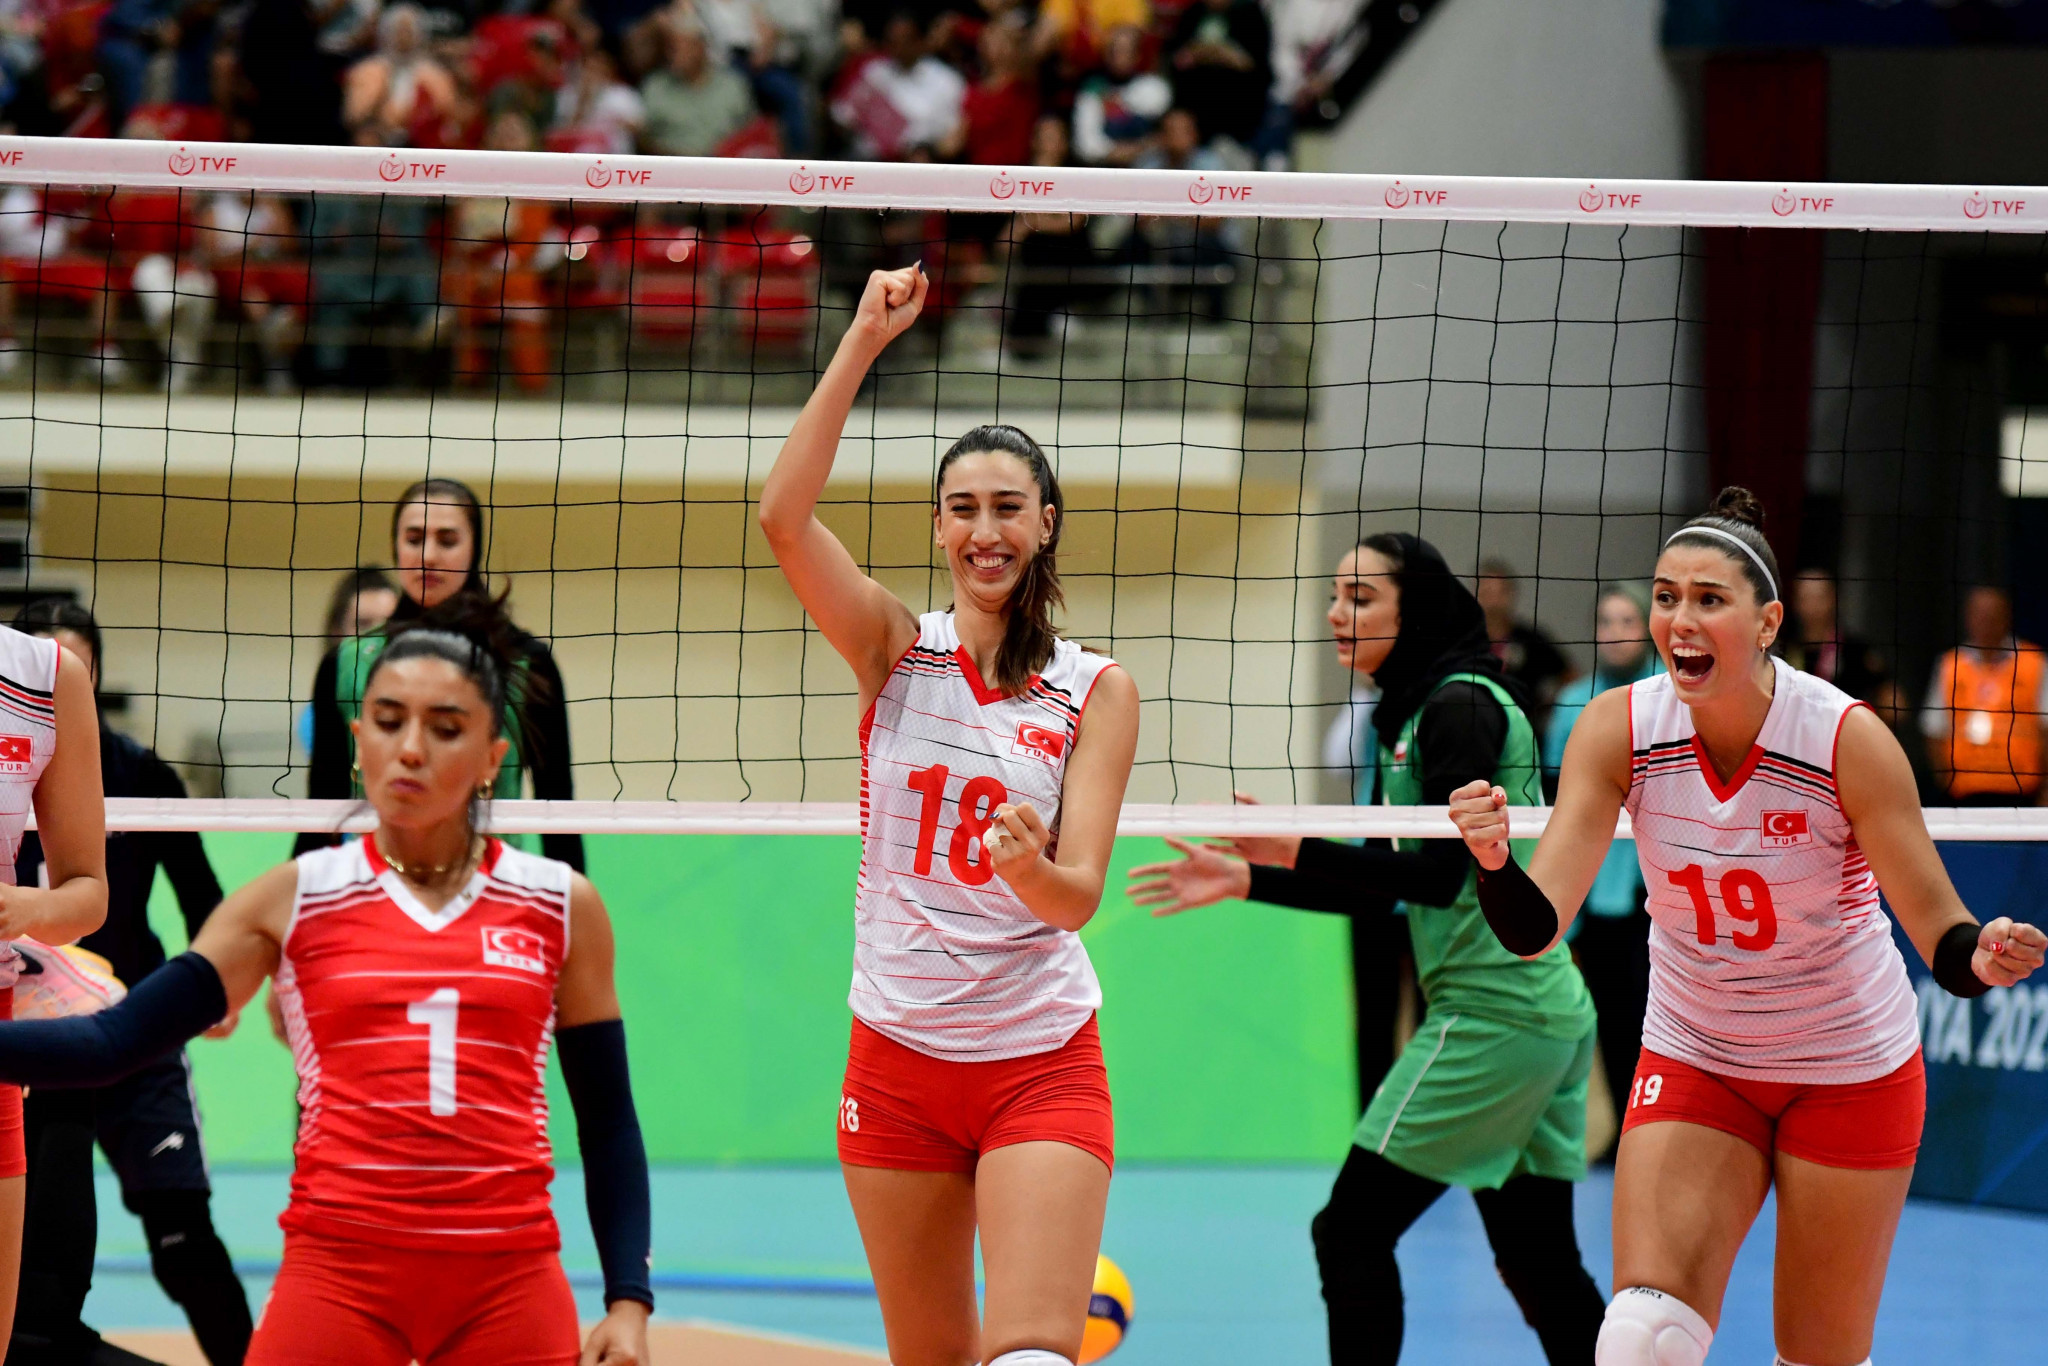 Turkey cruised to a straight-sets victory over Iran to win women's volleyball gold ©Konya 2021